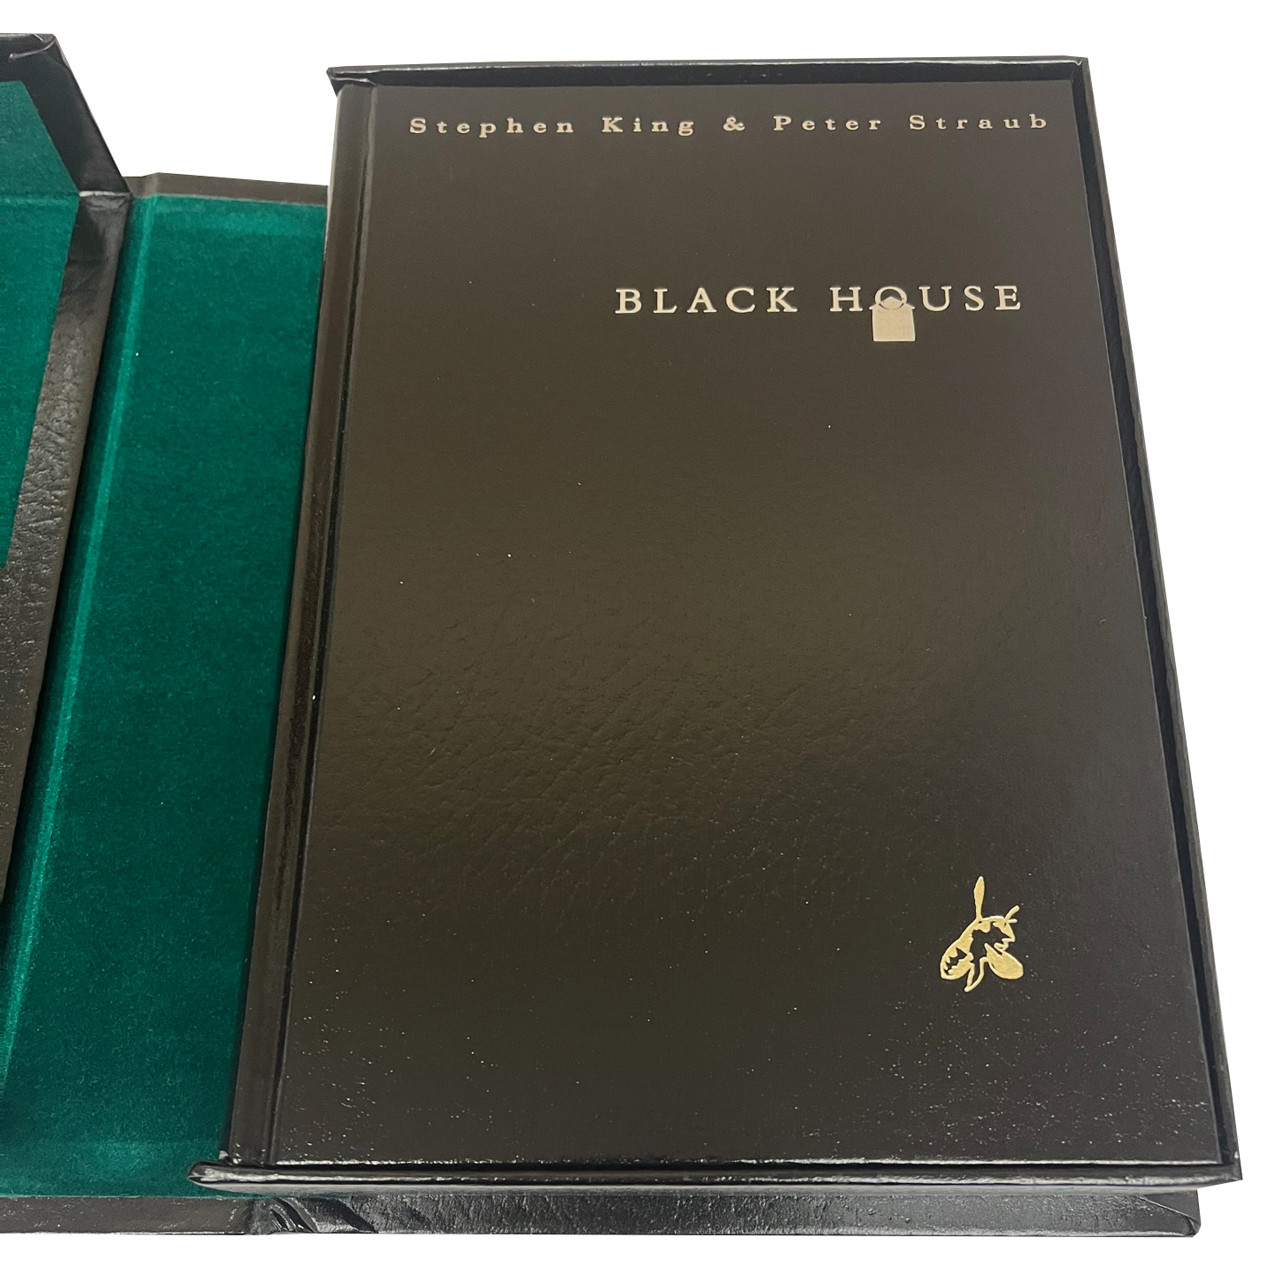 Stephen King, Peter Straub "Black House" Signed Limited First Edition, Number 234 of 1,520 Traycased [Very Fine]